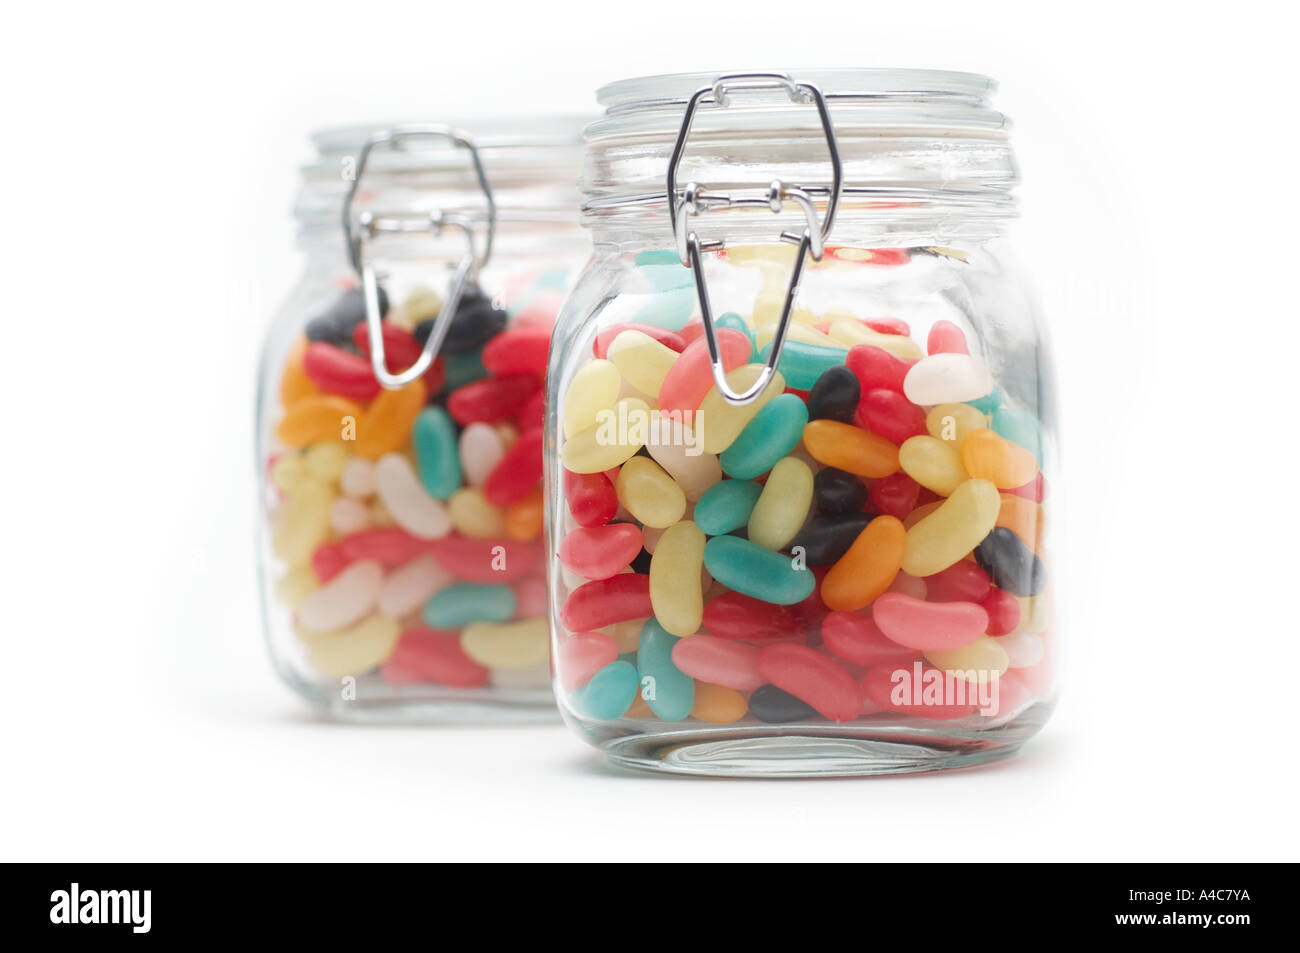 jar, jars, full, of, hands, full, gift, giving, palm, give, Jelly, beans, candy, sweet, sweets, sweeties, confectionery, tooth, Stock Photo